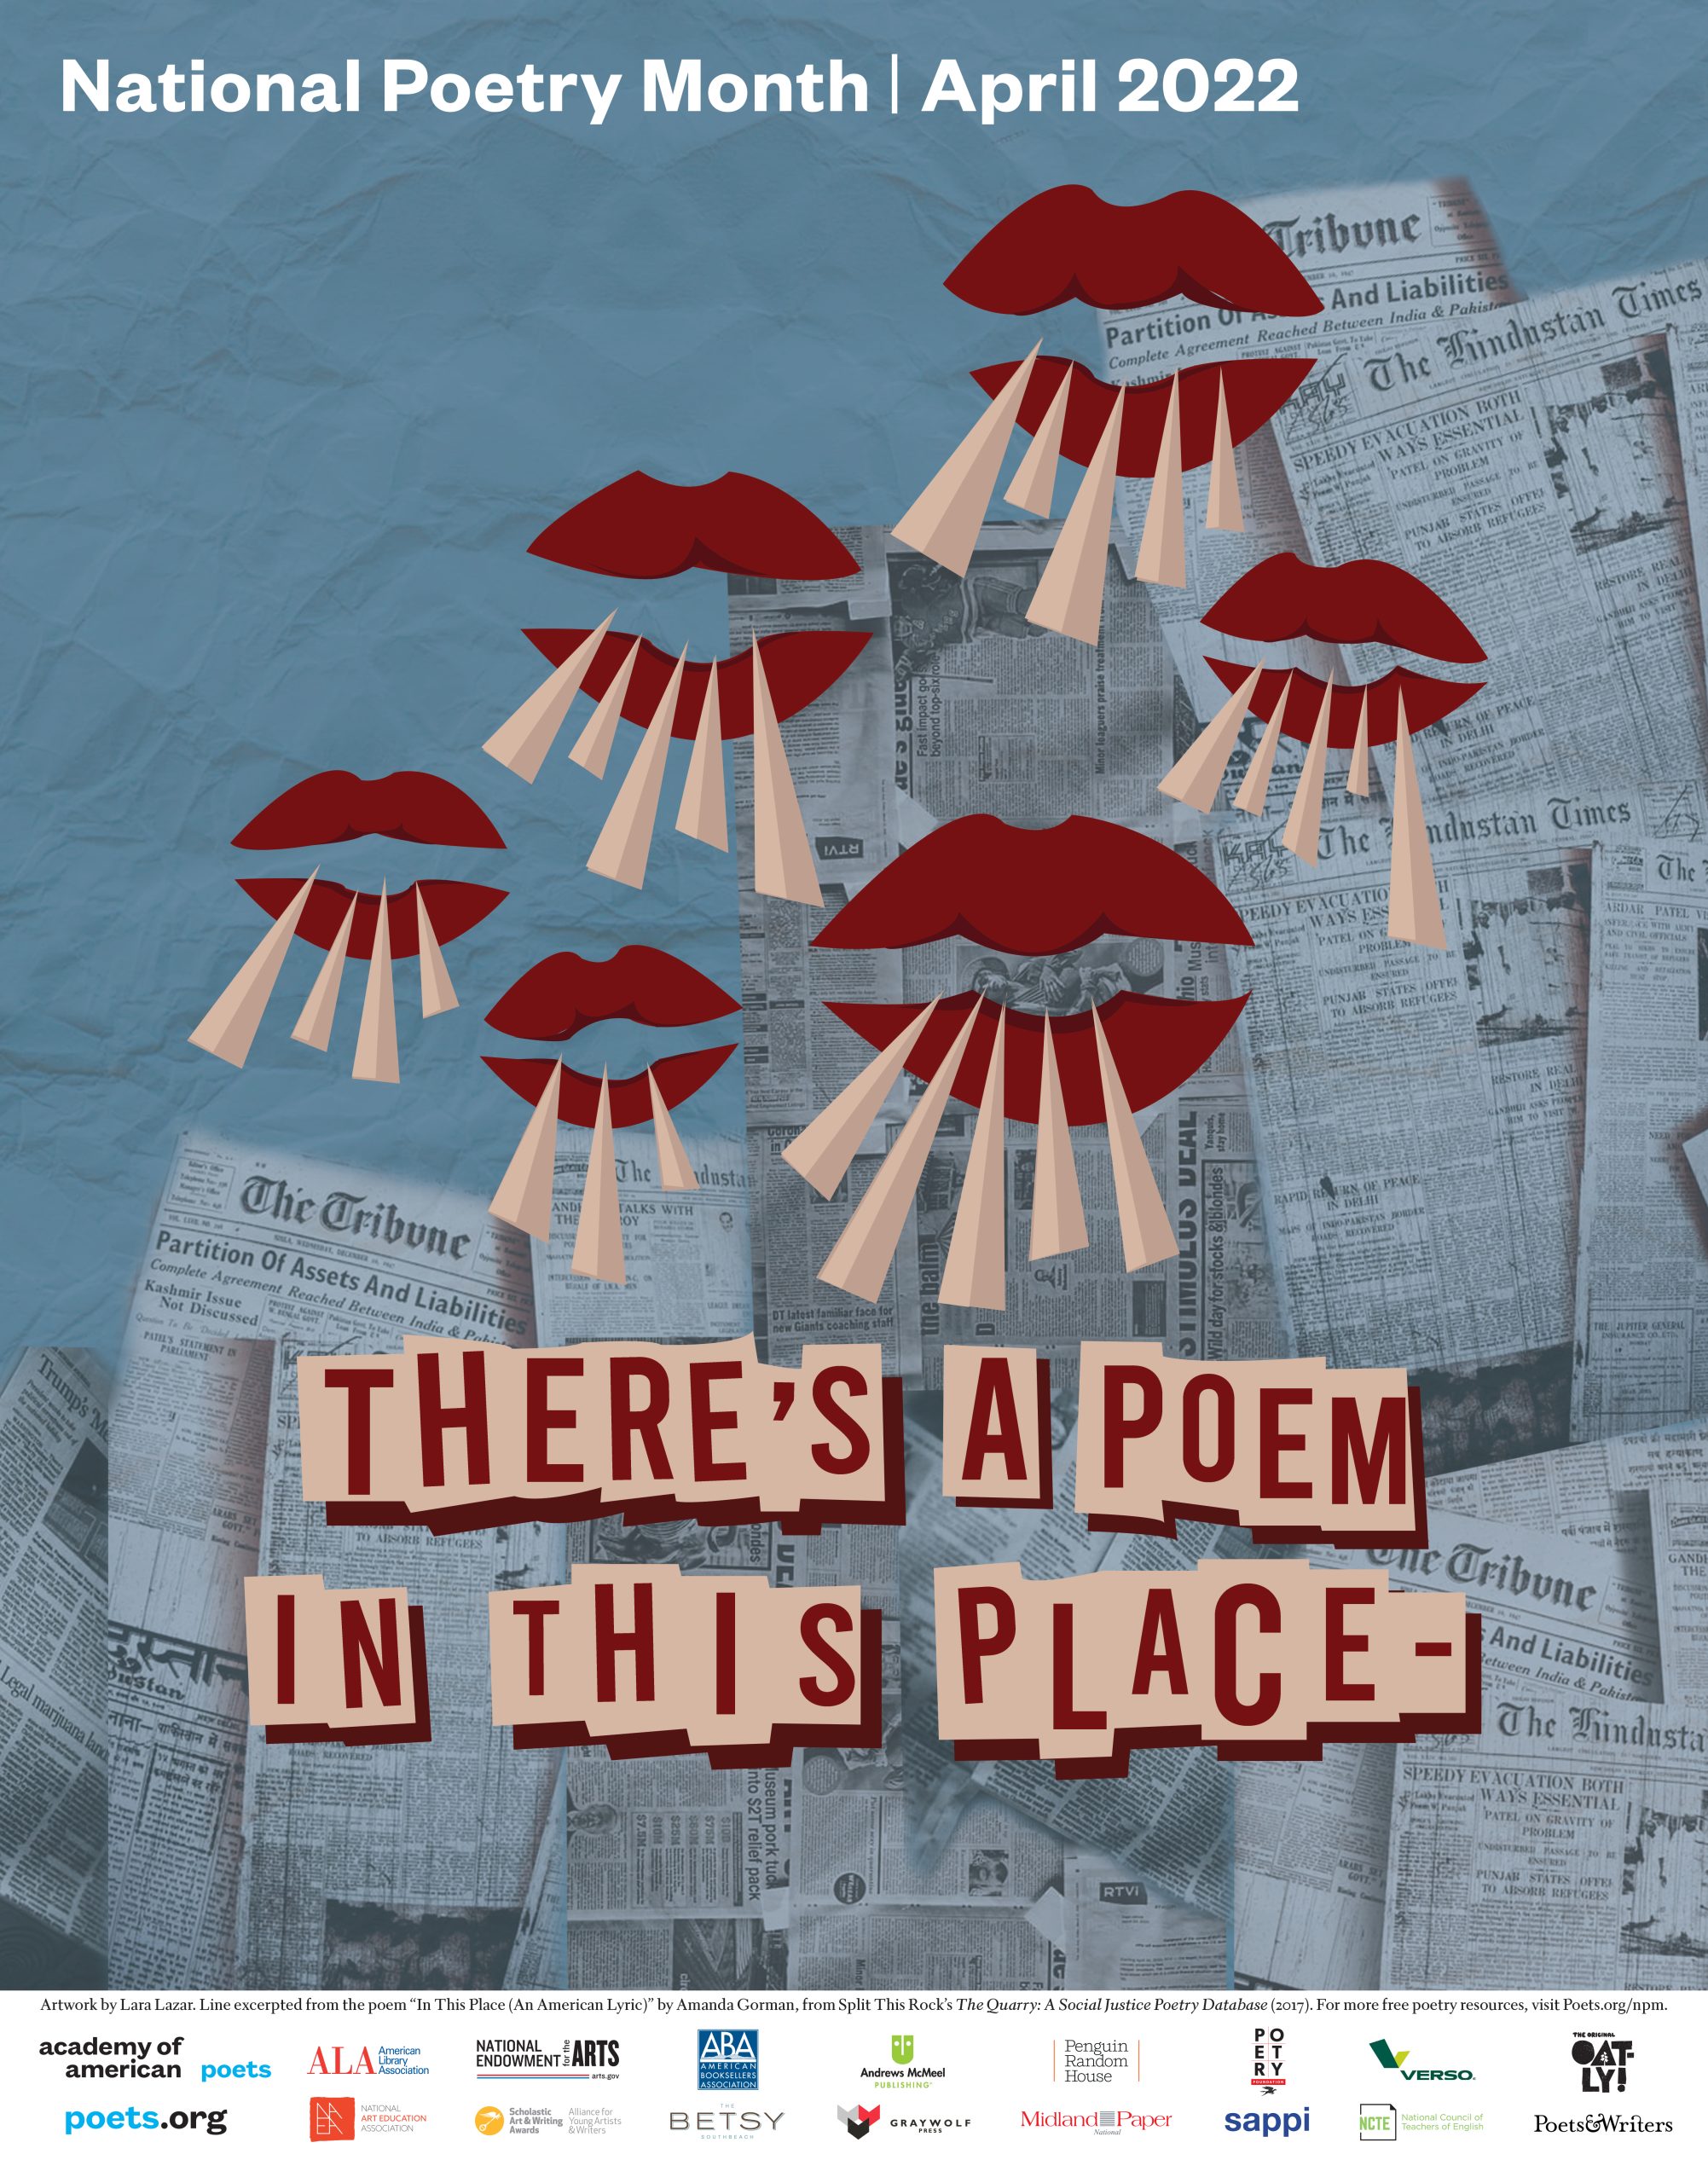 This poster was designed by eleventh grader Lara L. from Saunders Trades and Technical High School in Yonkers, New York, who was the winner of the 2022 National Poetry Month Poster Contest, and features a line by 2021 Presidential Inaugural Poet and 2017 National Youth Poet Laureate Amanda Gorman.